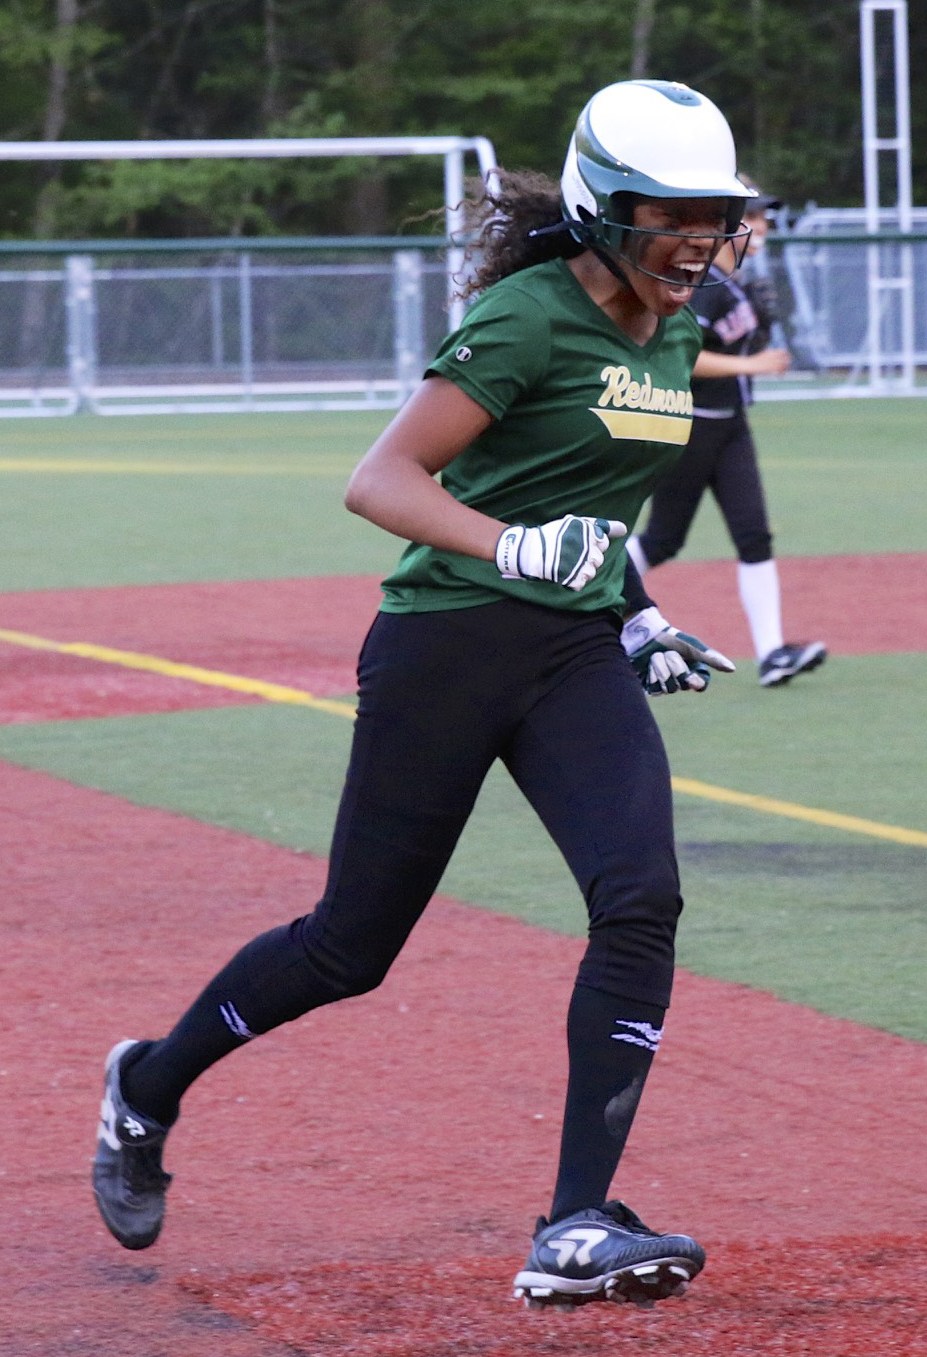 Redmond’s Kiki Milloy is ecstatic while running the bases after hitting a home run. Courtesy of Kristen Gibson